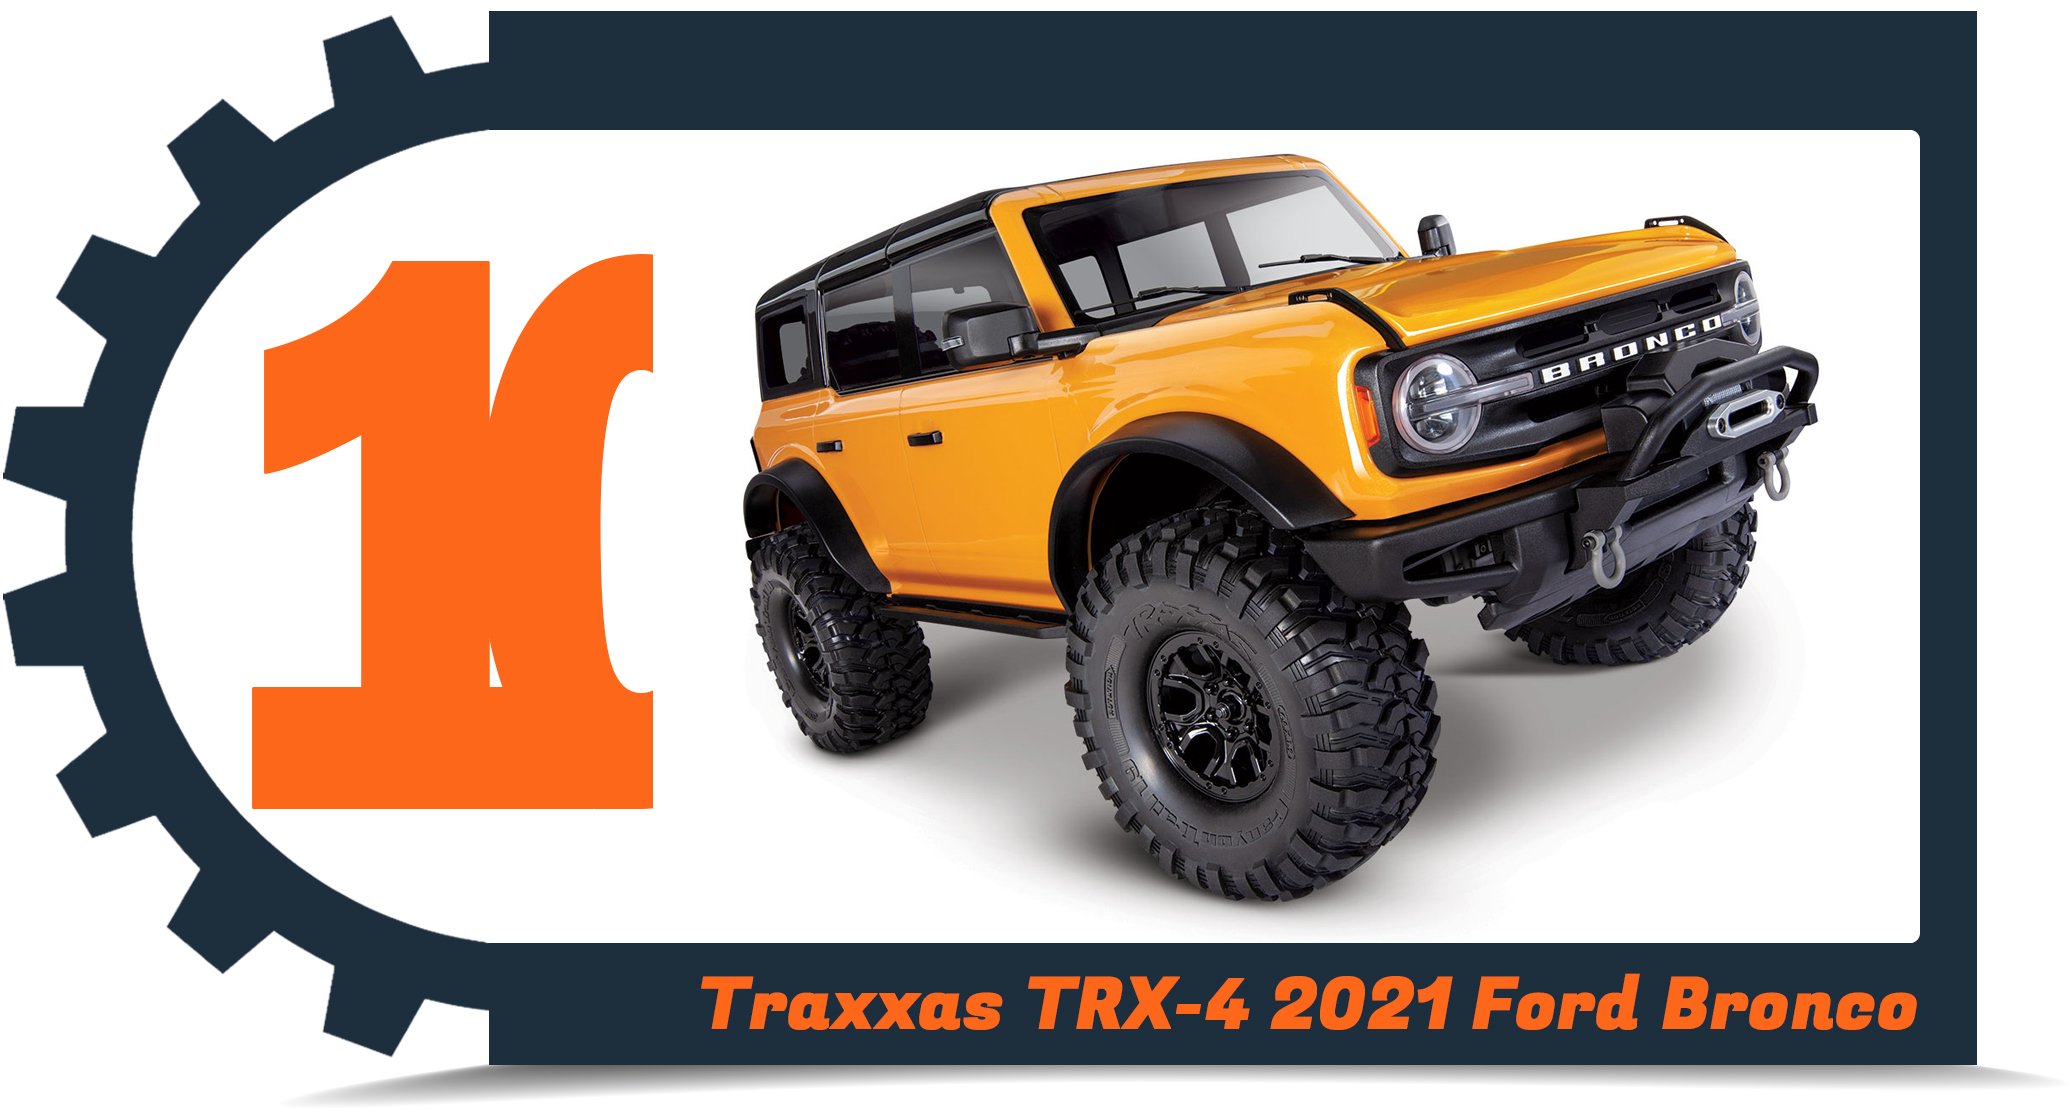 Top 10 RC Cars - Number 10 - Traxxas TRX-4 Ford Bronco